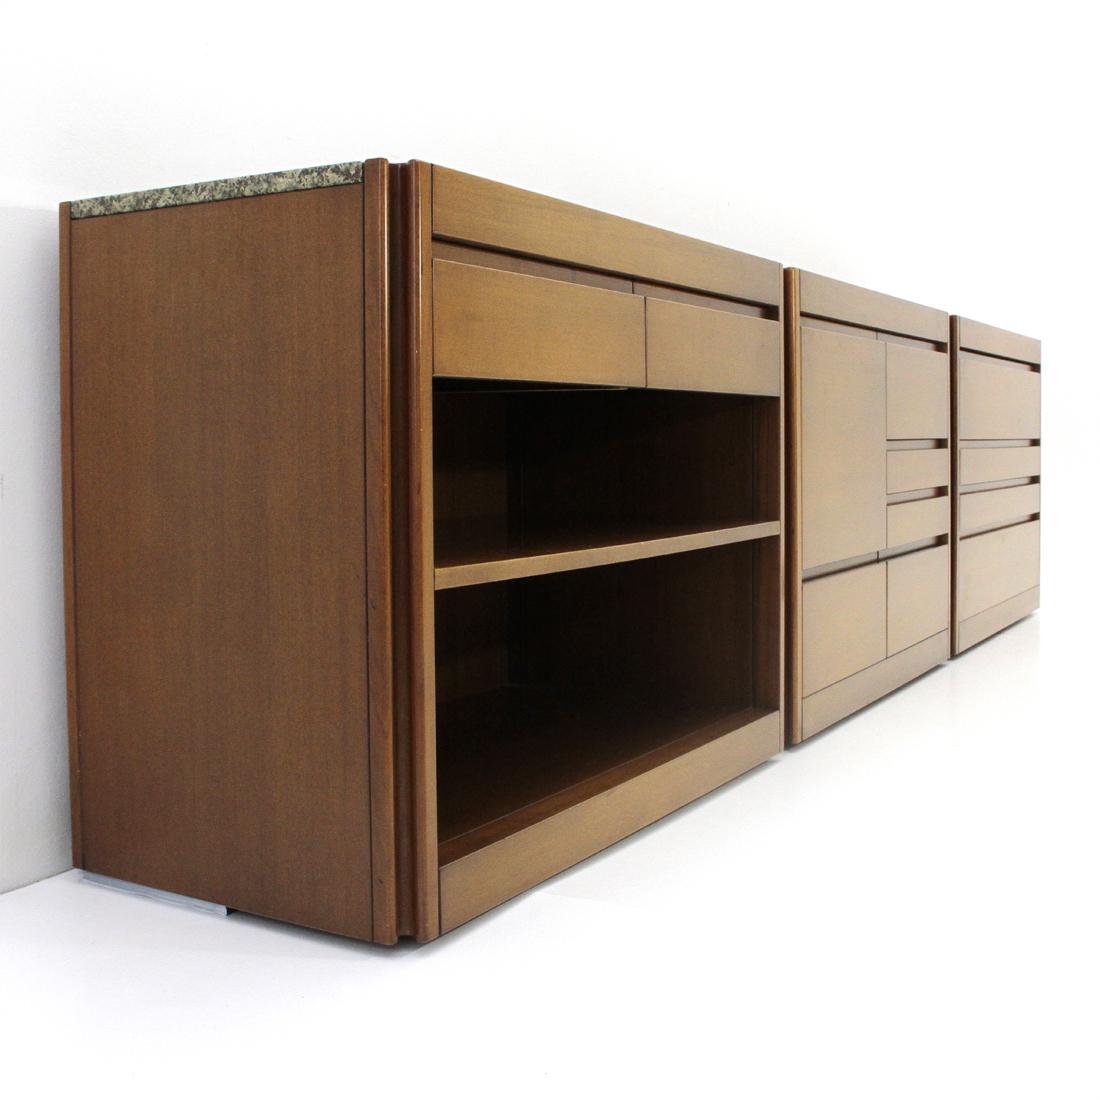 Dimensioni singolo elemento: Larghezza 96 cm – Profondità 48 cm – Altezza 72 cm

Sideboard designed in the 60s by Angelo Mangiarotti and produced by Molteni. Set of three.
Excellent workmanship and design, extreme attention to detail, structure in